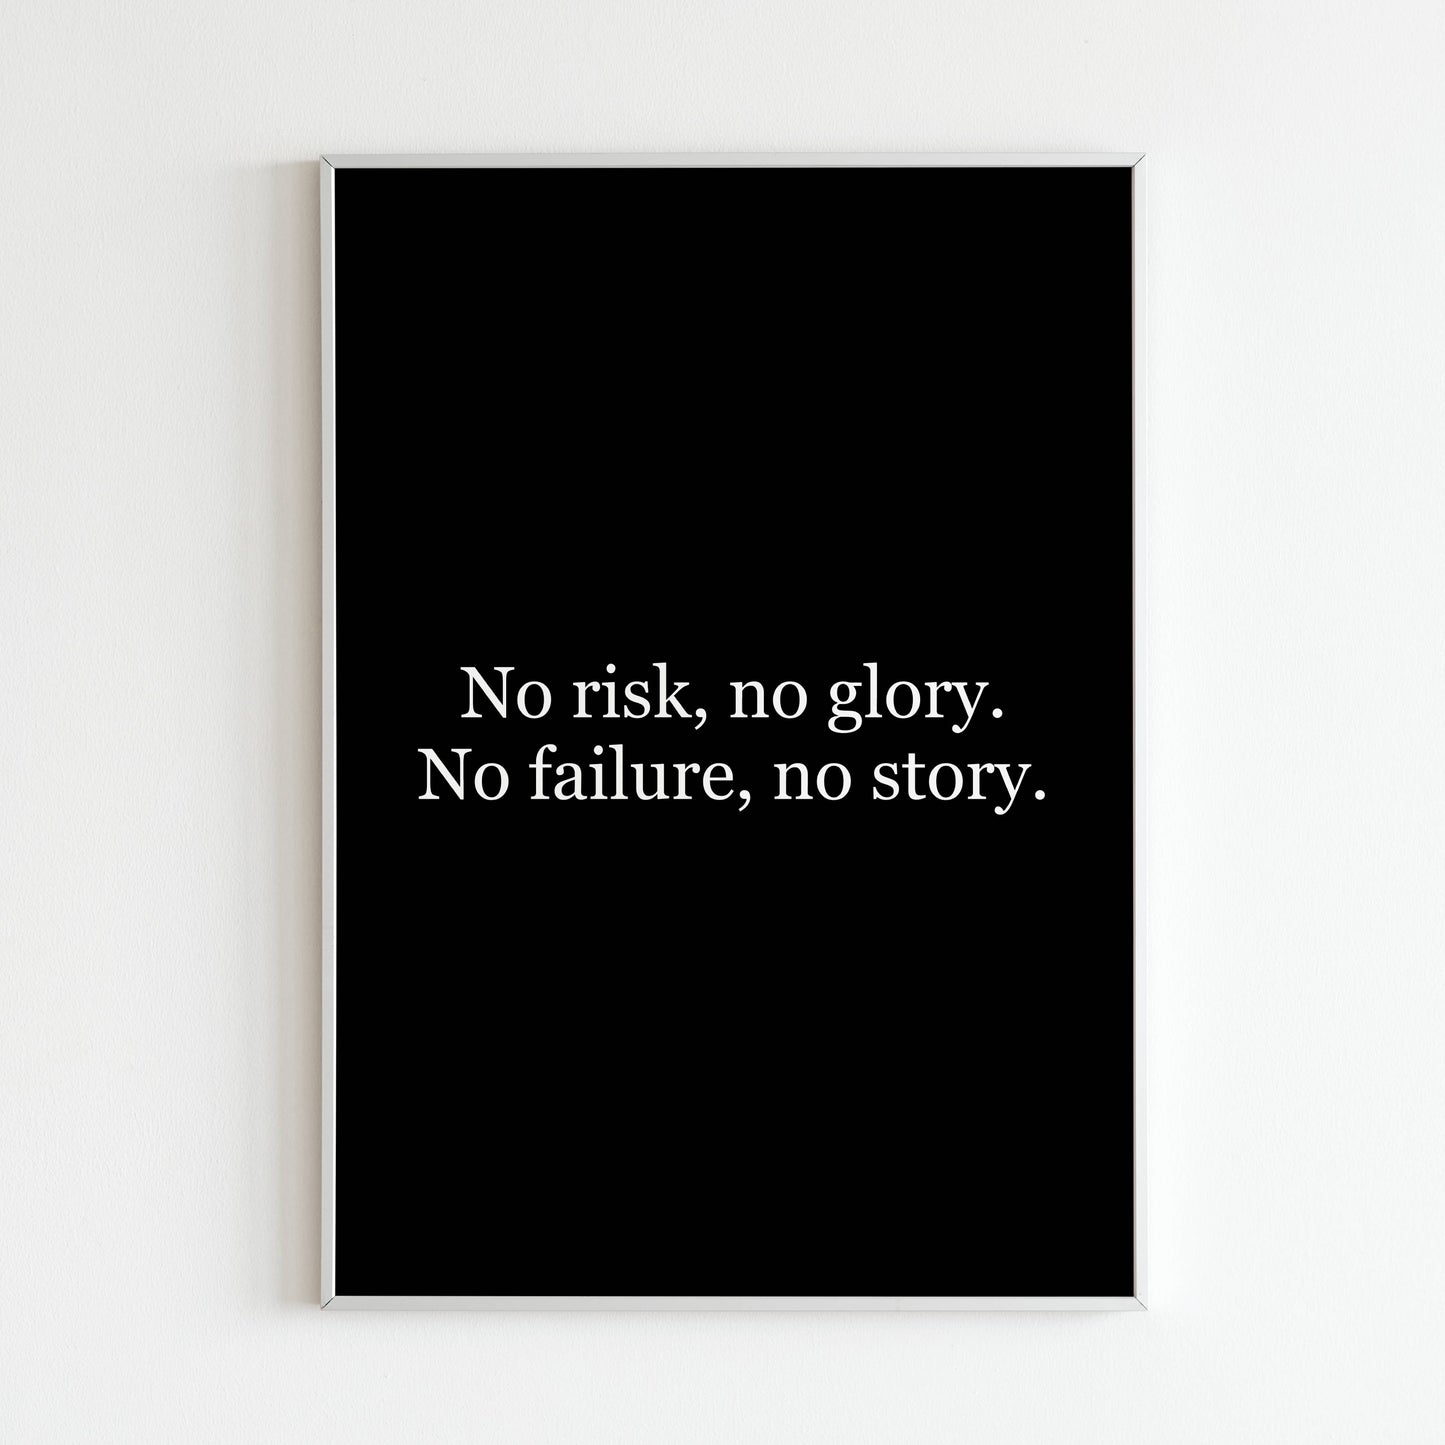 No risk, no glory. No failure, no story. - Printed Wall Art / Poster. This beautiful poster adds a touch of sophistication to your space. Arrives ready to hang.